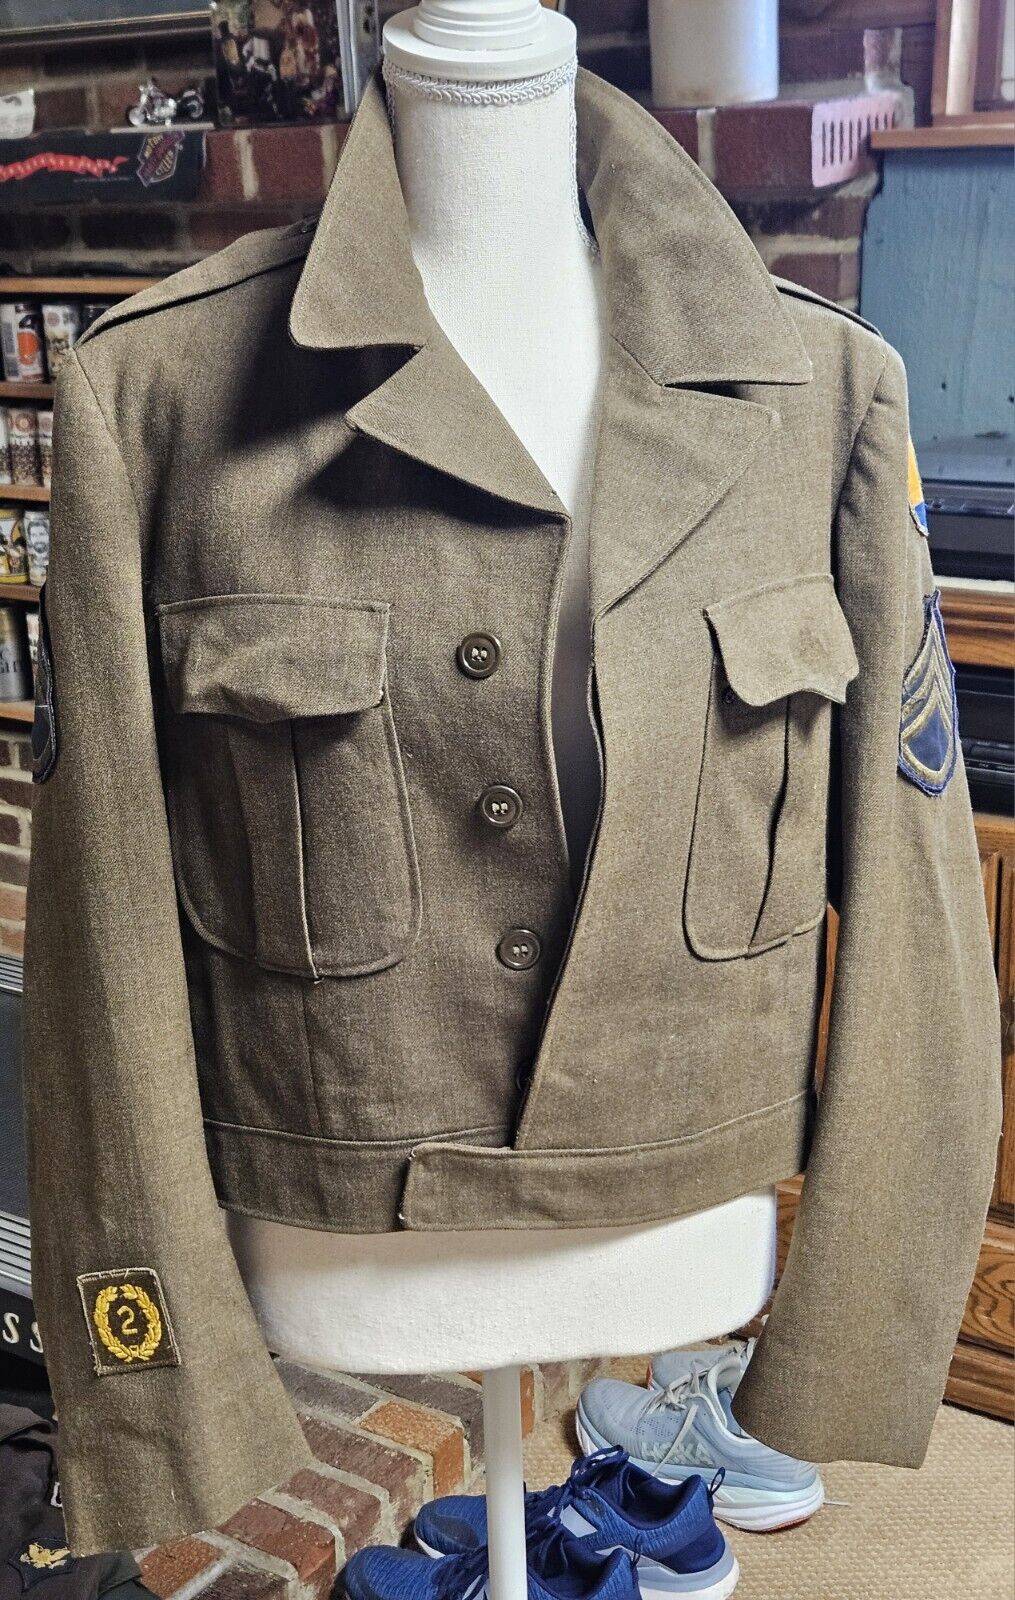 Vtg 1950 US Army officer Field Jacket Waist Wool Uniform 40 R with patches Green